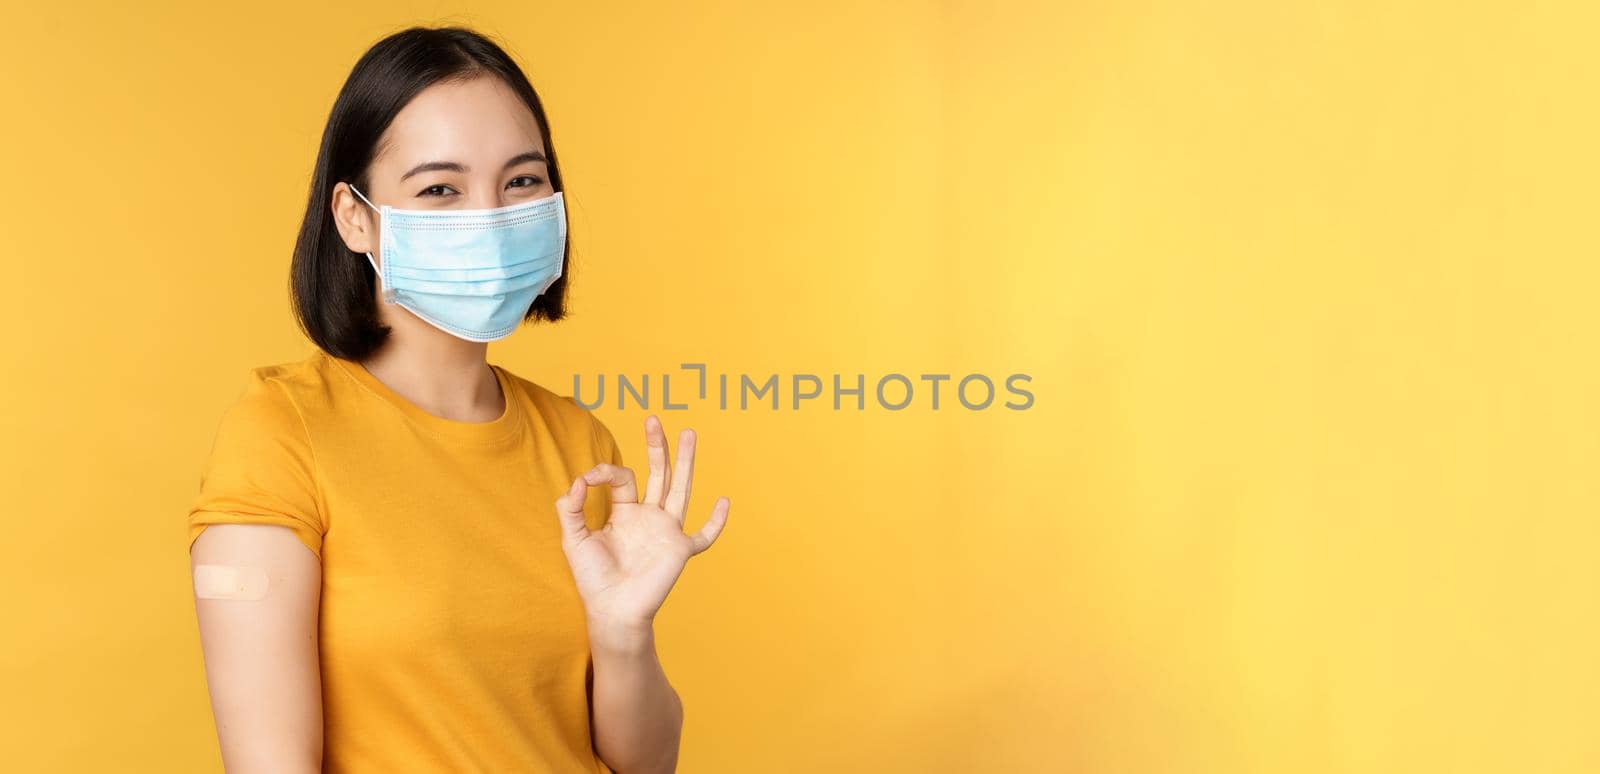 Vaccination from covid and health concept. Happy asian girl showing okay, wearing medical mask, band aid on shoulder, got coronavirus vaccine shot, yellow background.